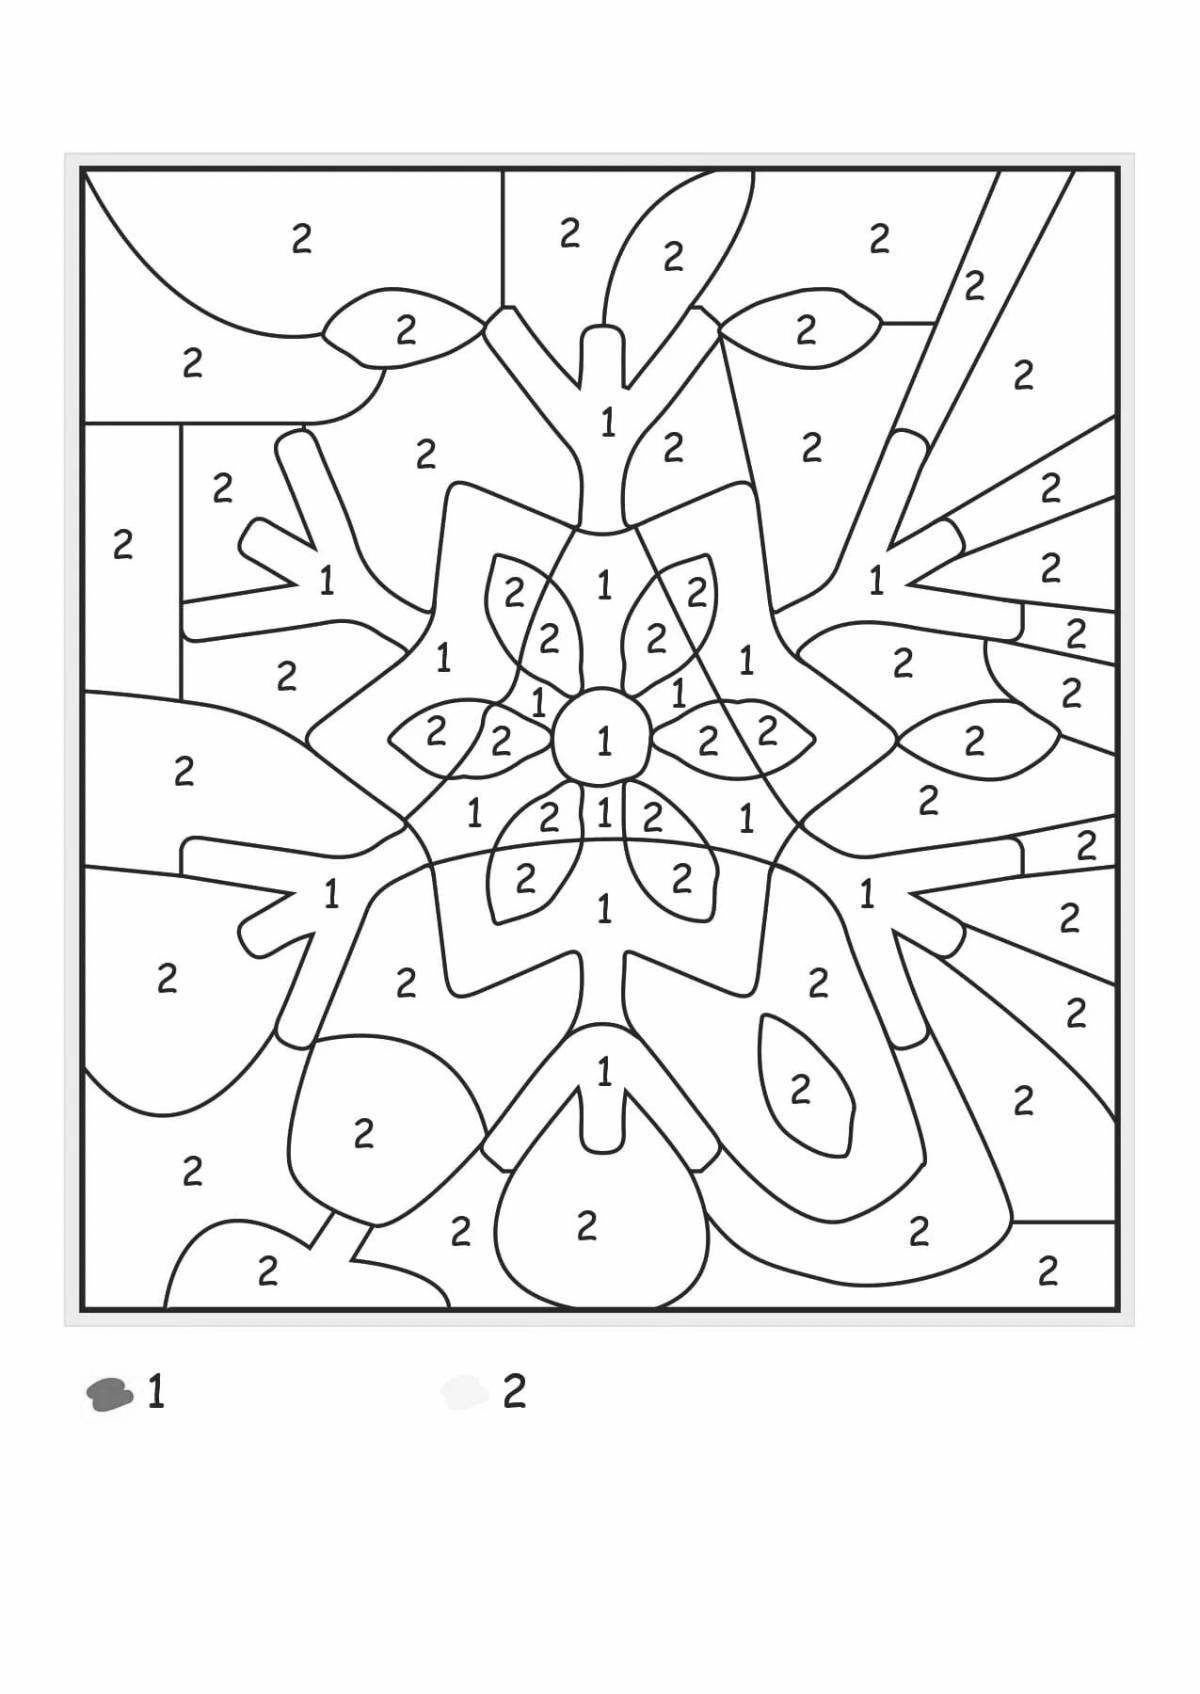 Merry winter math coloring book